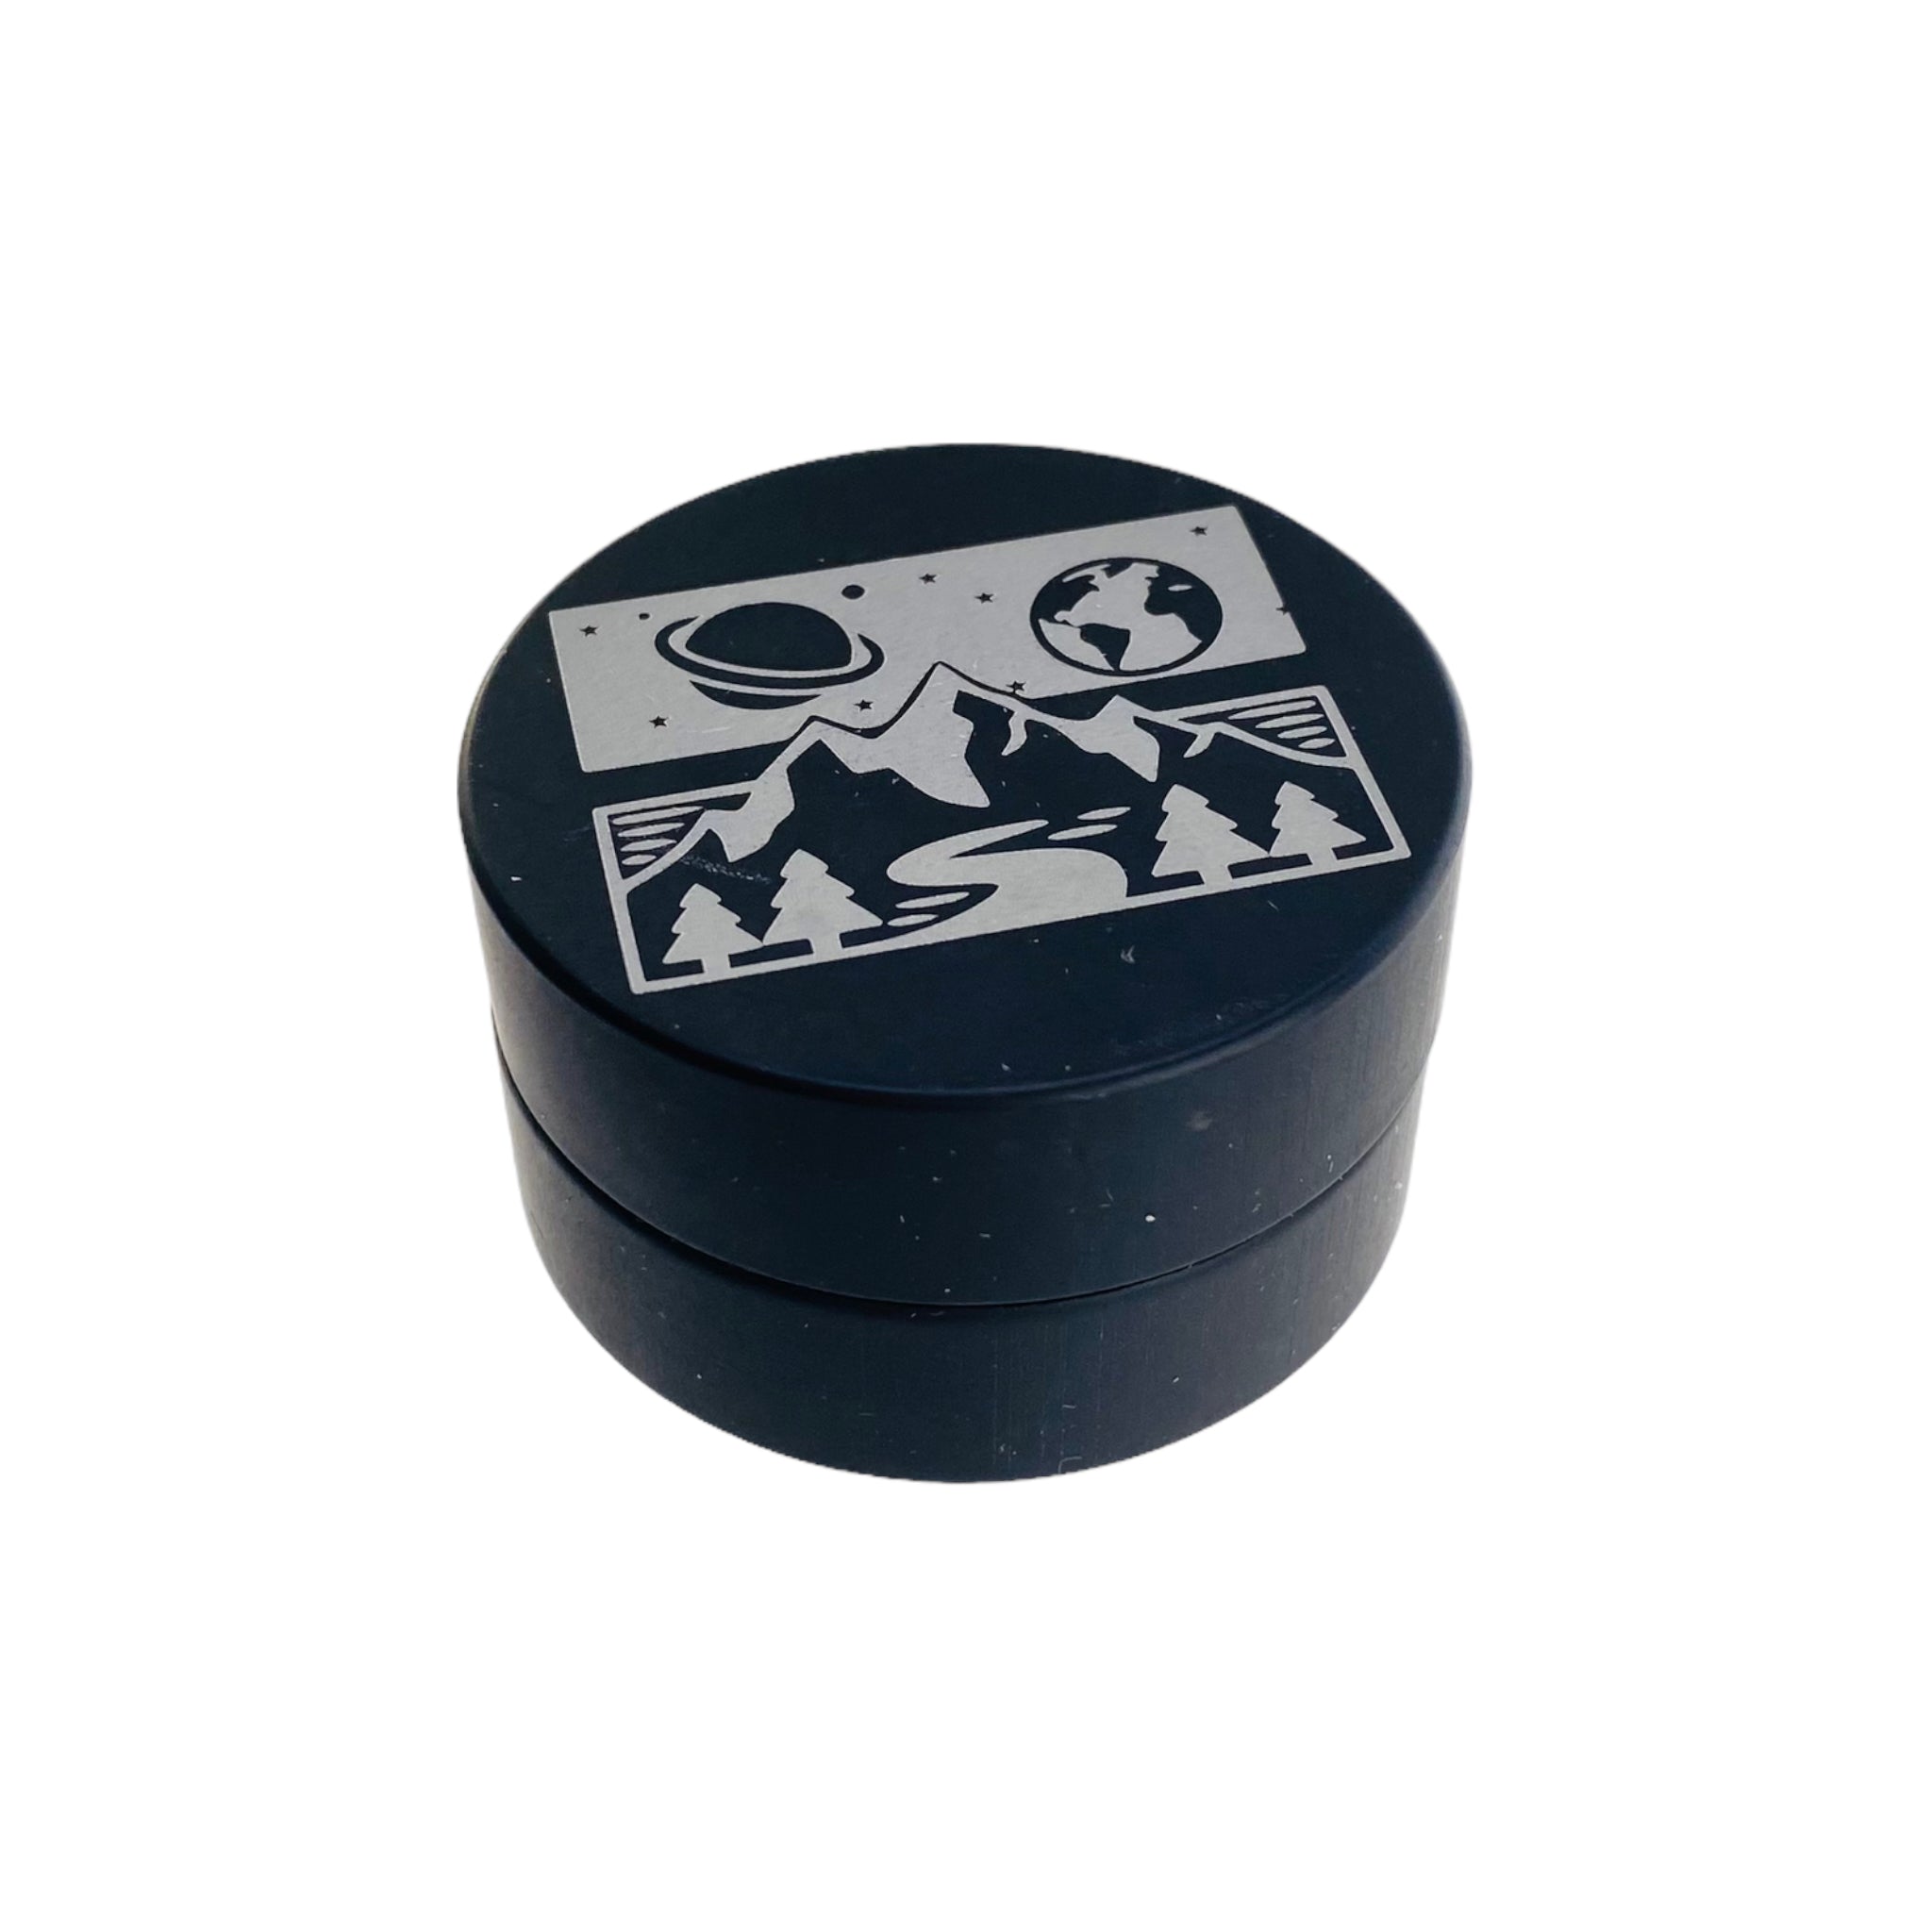 Tahoe Grinders Black Anodized Aluminum Small Two Piece Weed Grinder With Space Mountain